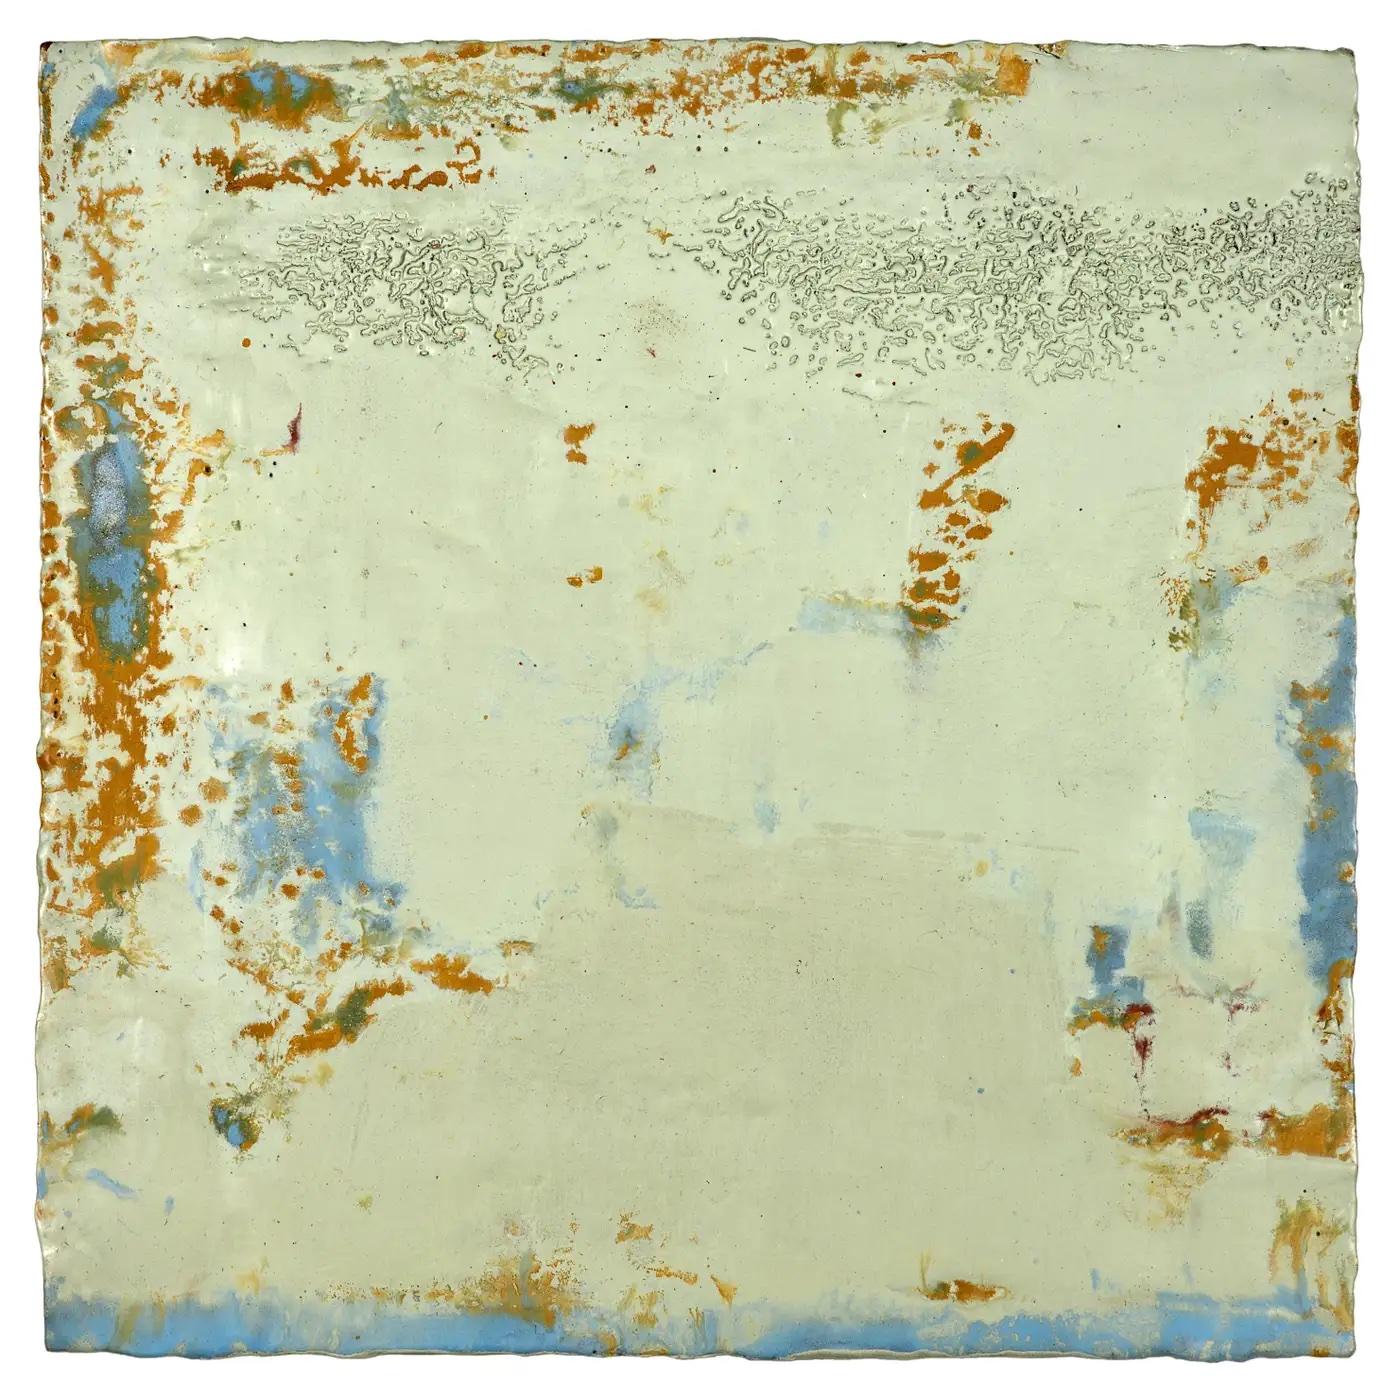 Contemporary American ceramic artist Richard Hirsch's encaustic Painting of Nothing #73 is made of ceramic raw materials, dry pigment and wax. This piece is part of his ongoing Painting of Nothing Series. Hirsch applies the waxy mix with a brush